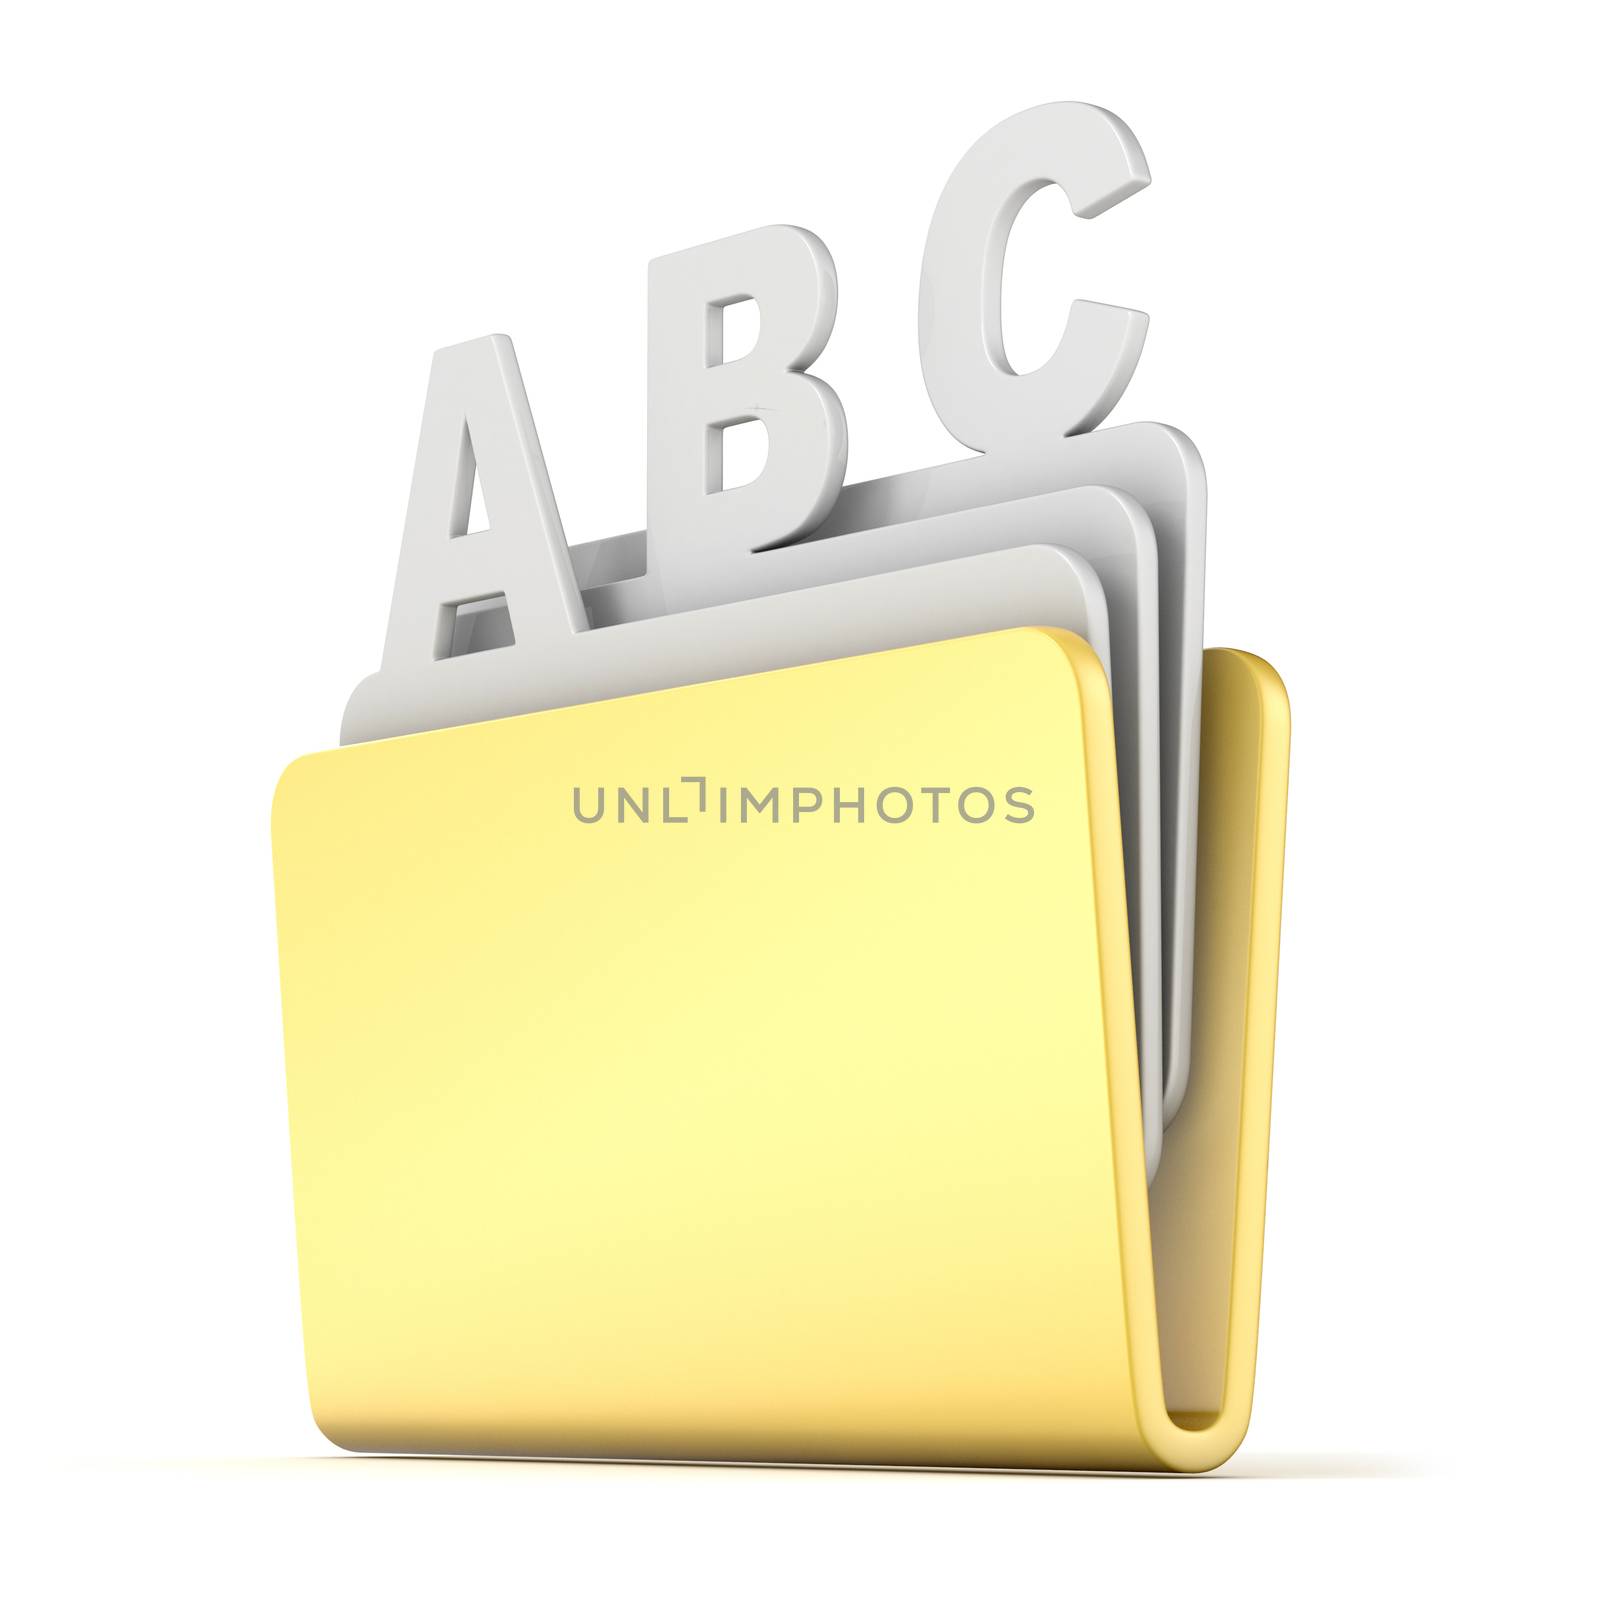 Computer folder with ABC files 3D render illustration isolated on white background